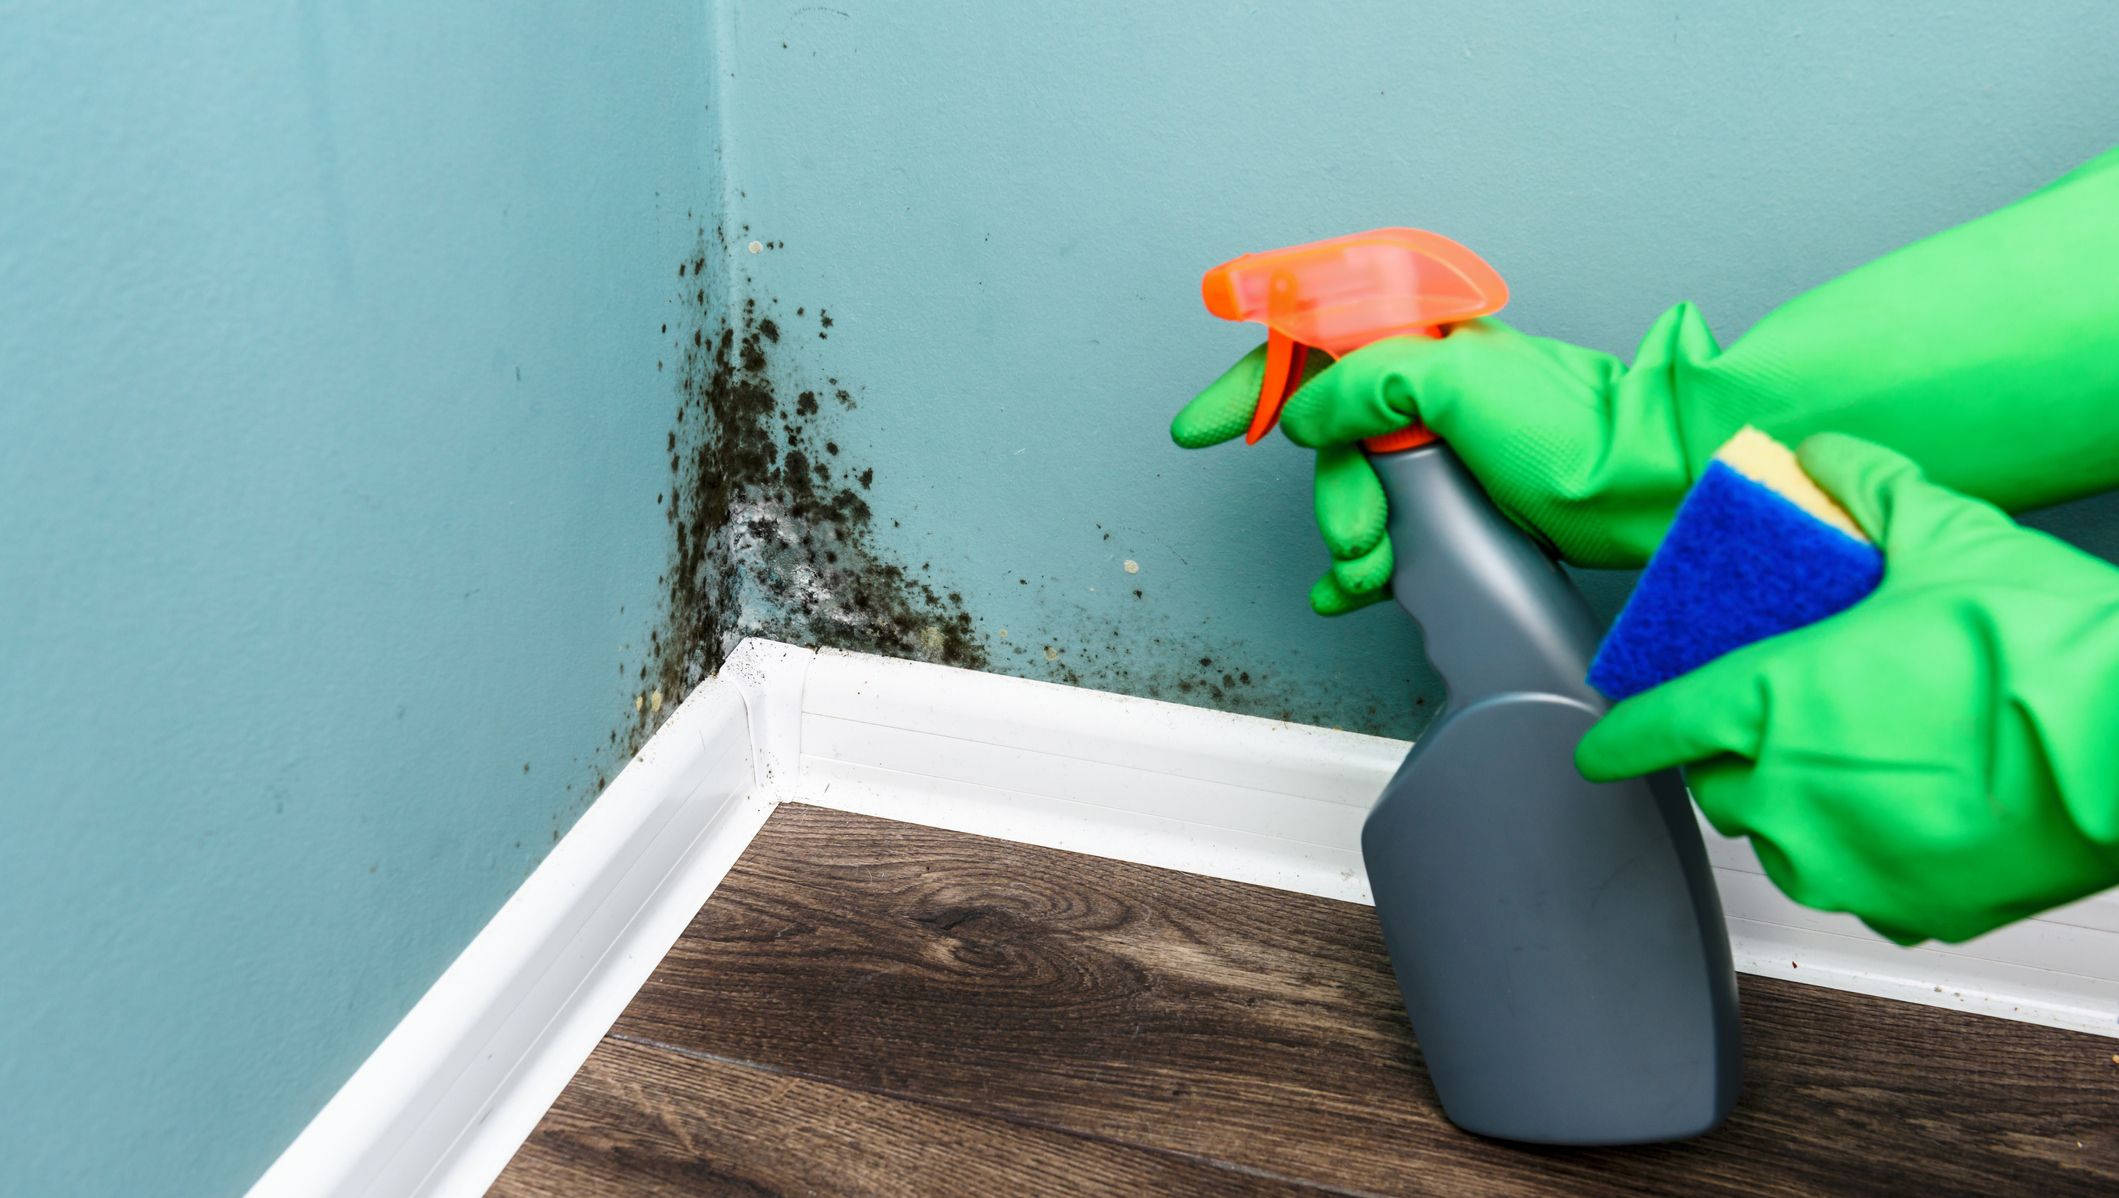 What Happens If You Accidentally Eat Mold?